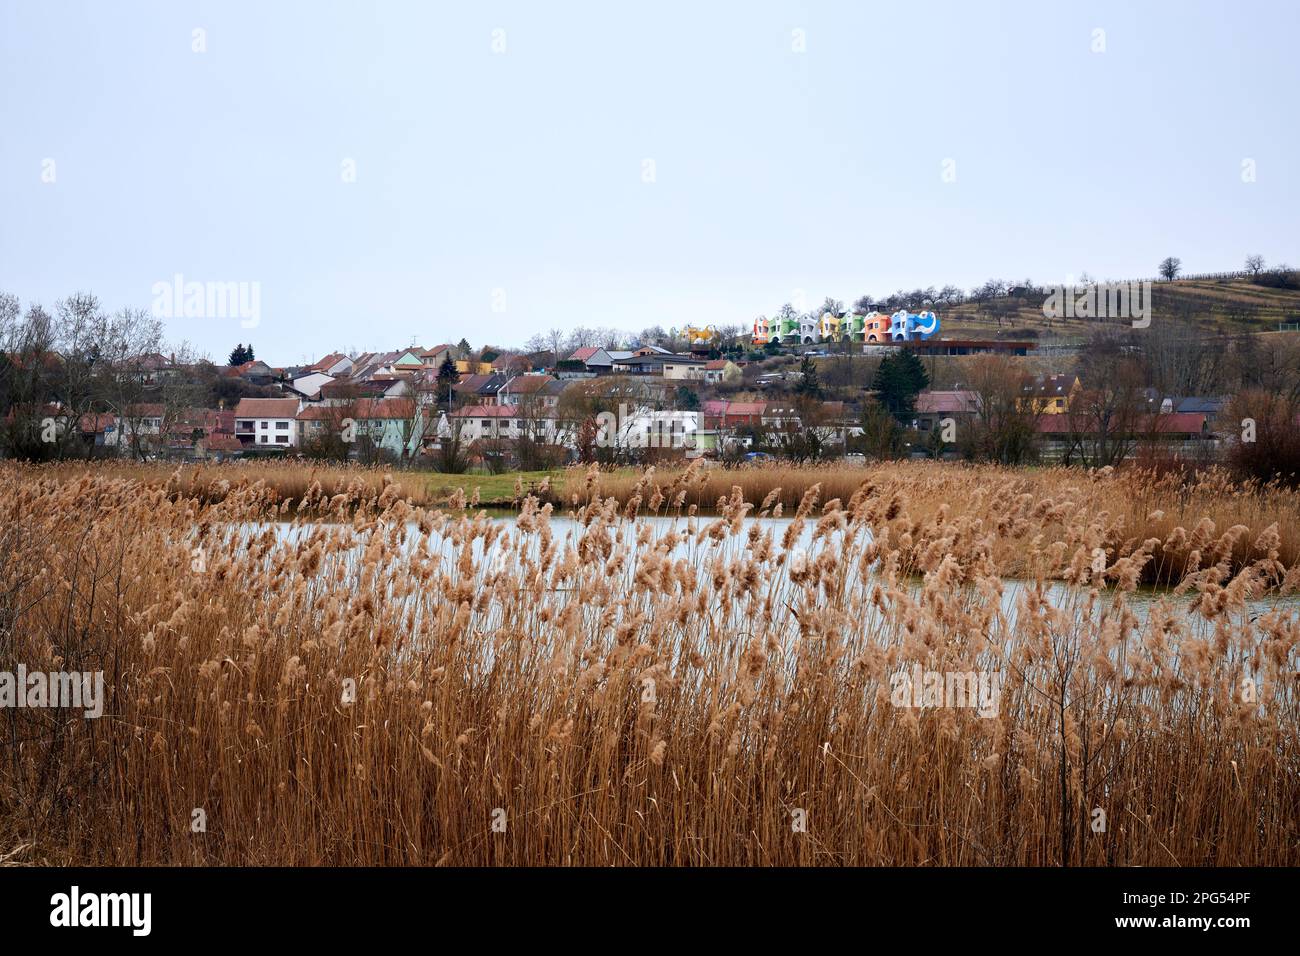 A city near the water with reeds and buildings in the background, Velke Pavlovice, czech republic Stock Photo